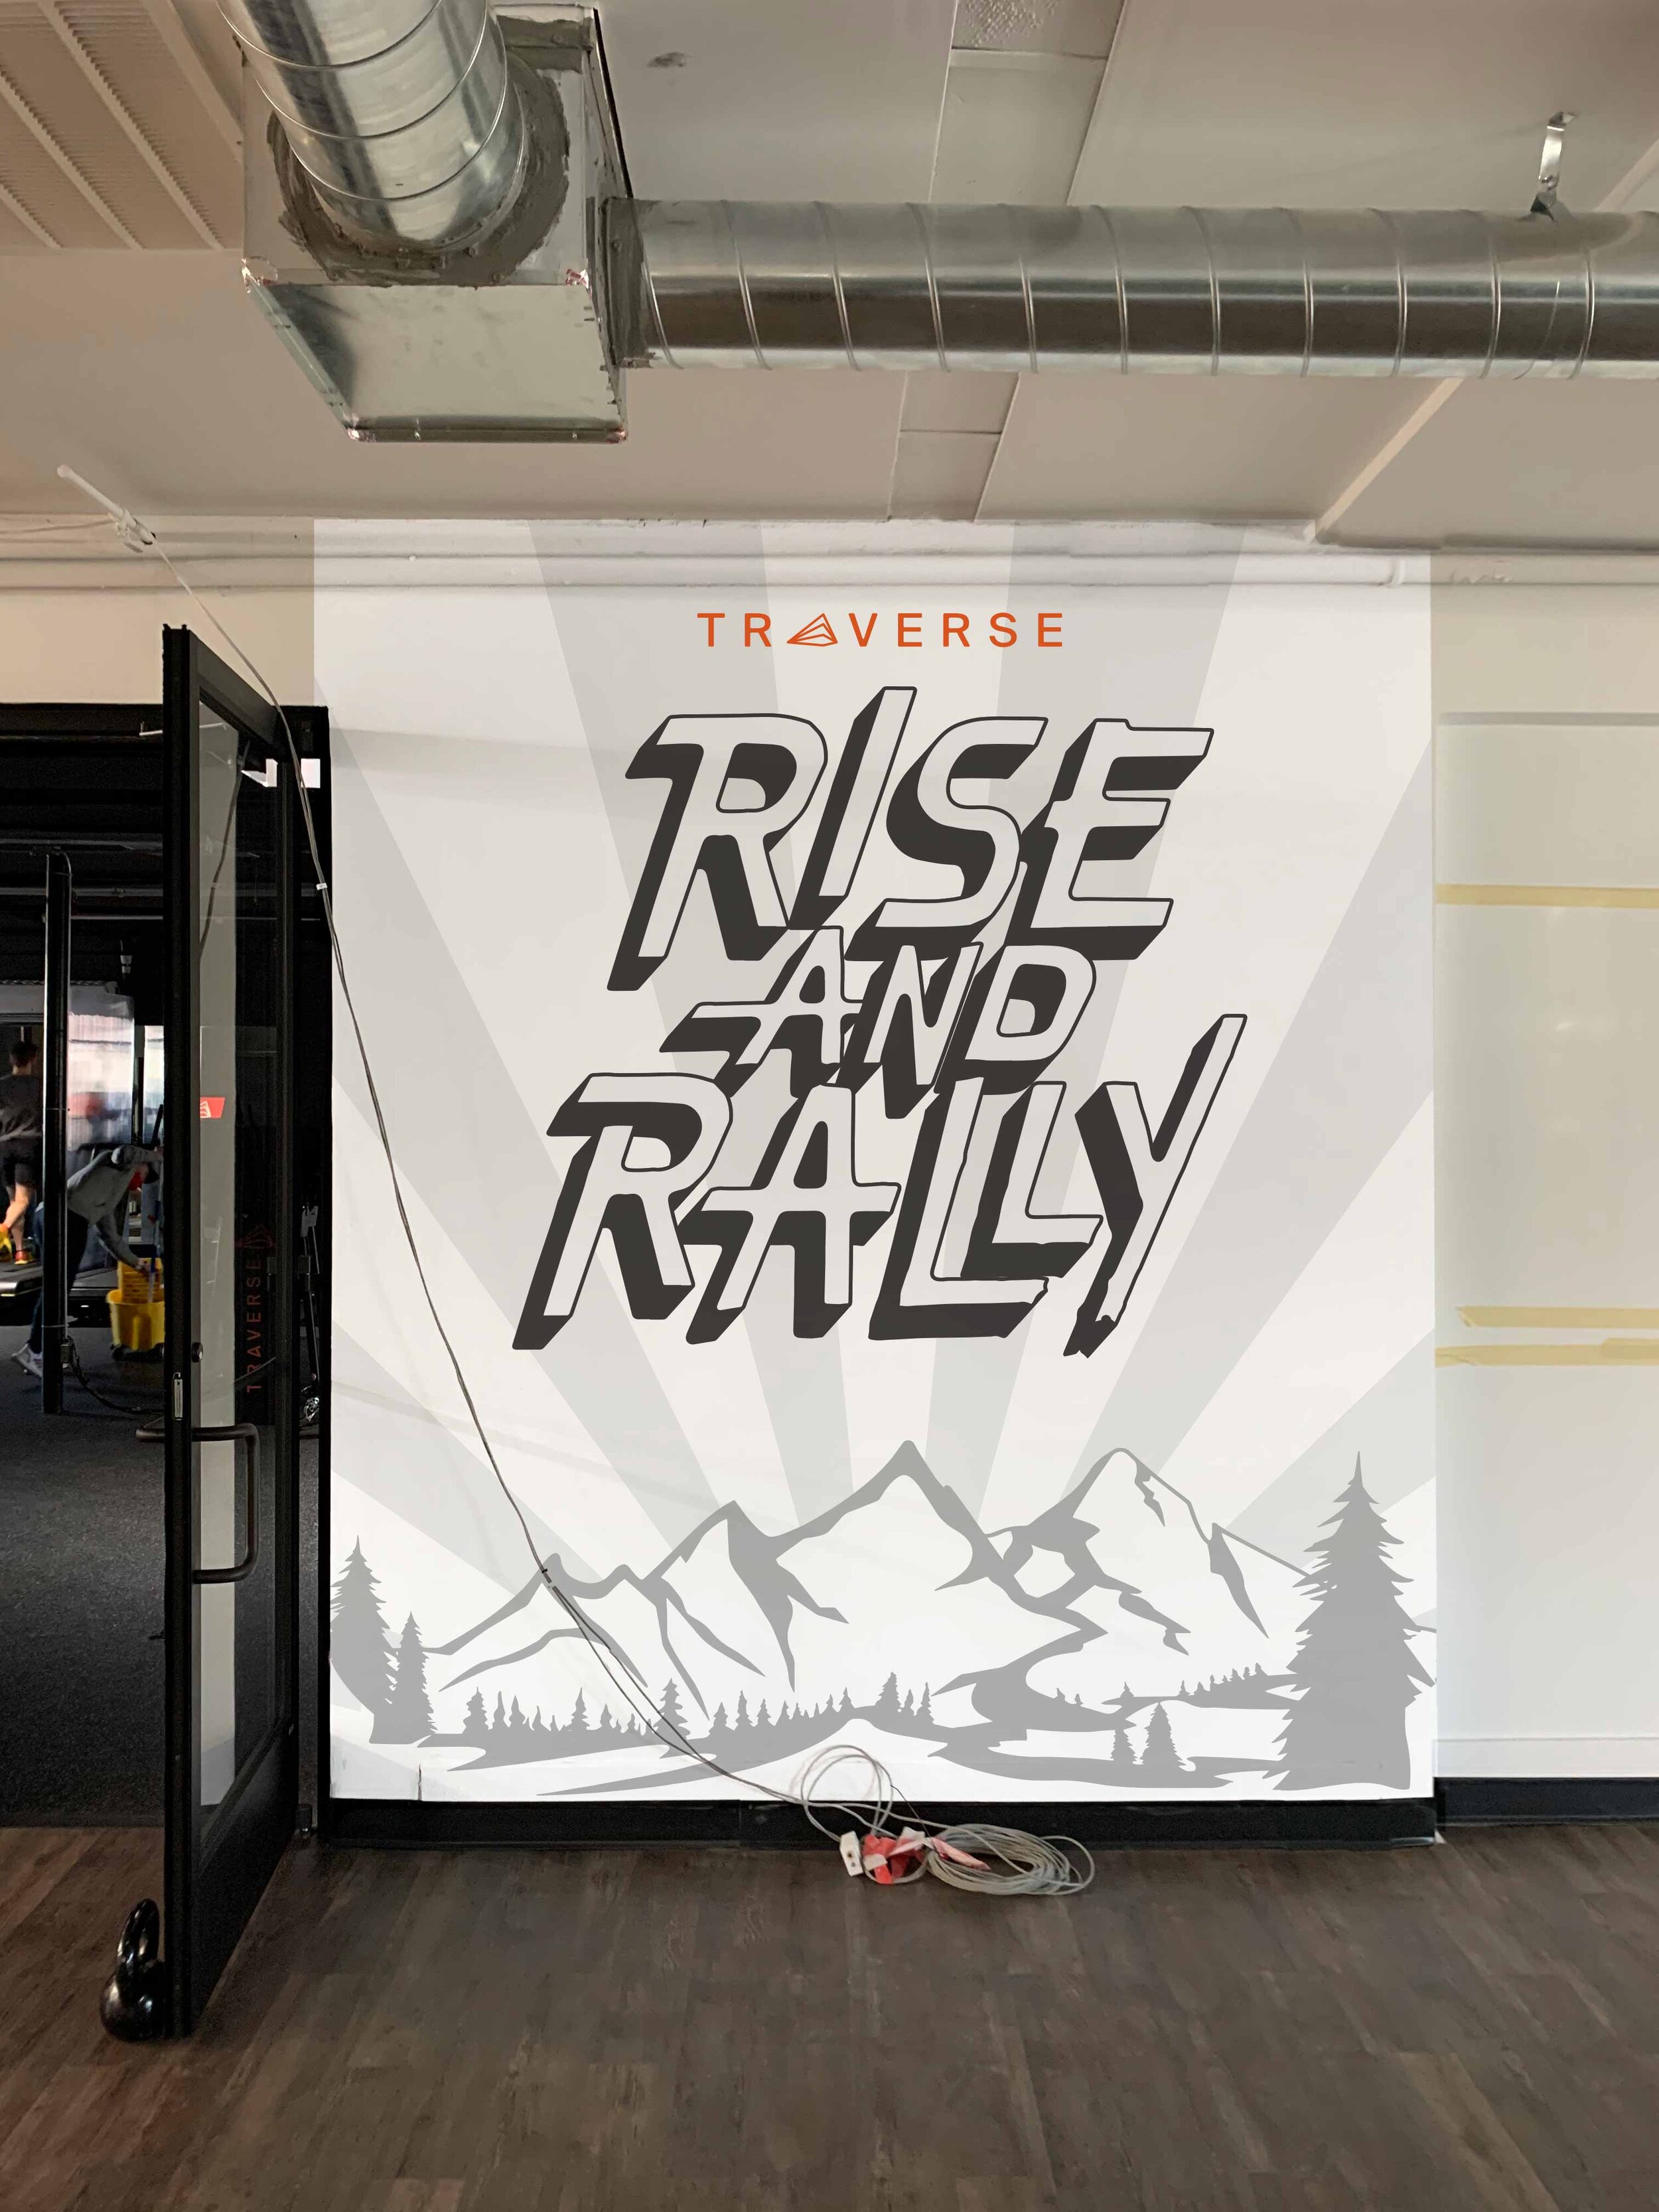 Traverse-Fitness-mural-rise-and-rally.jpg